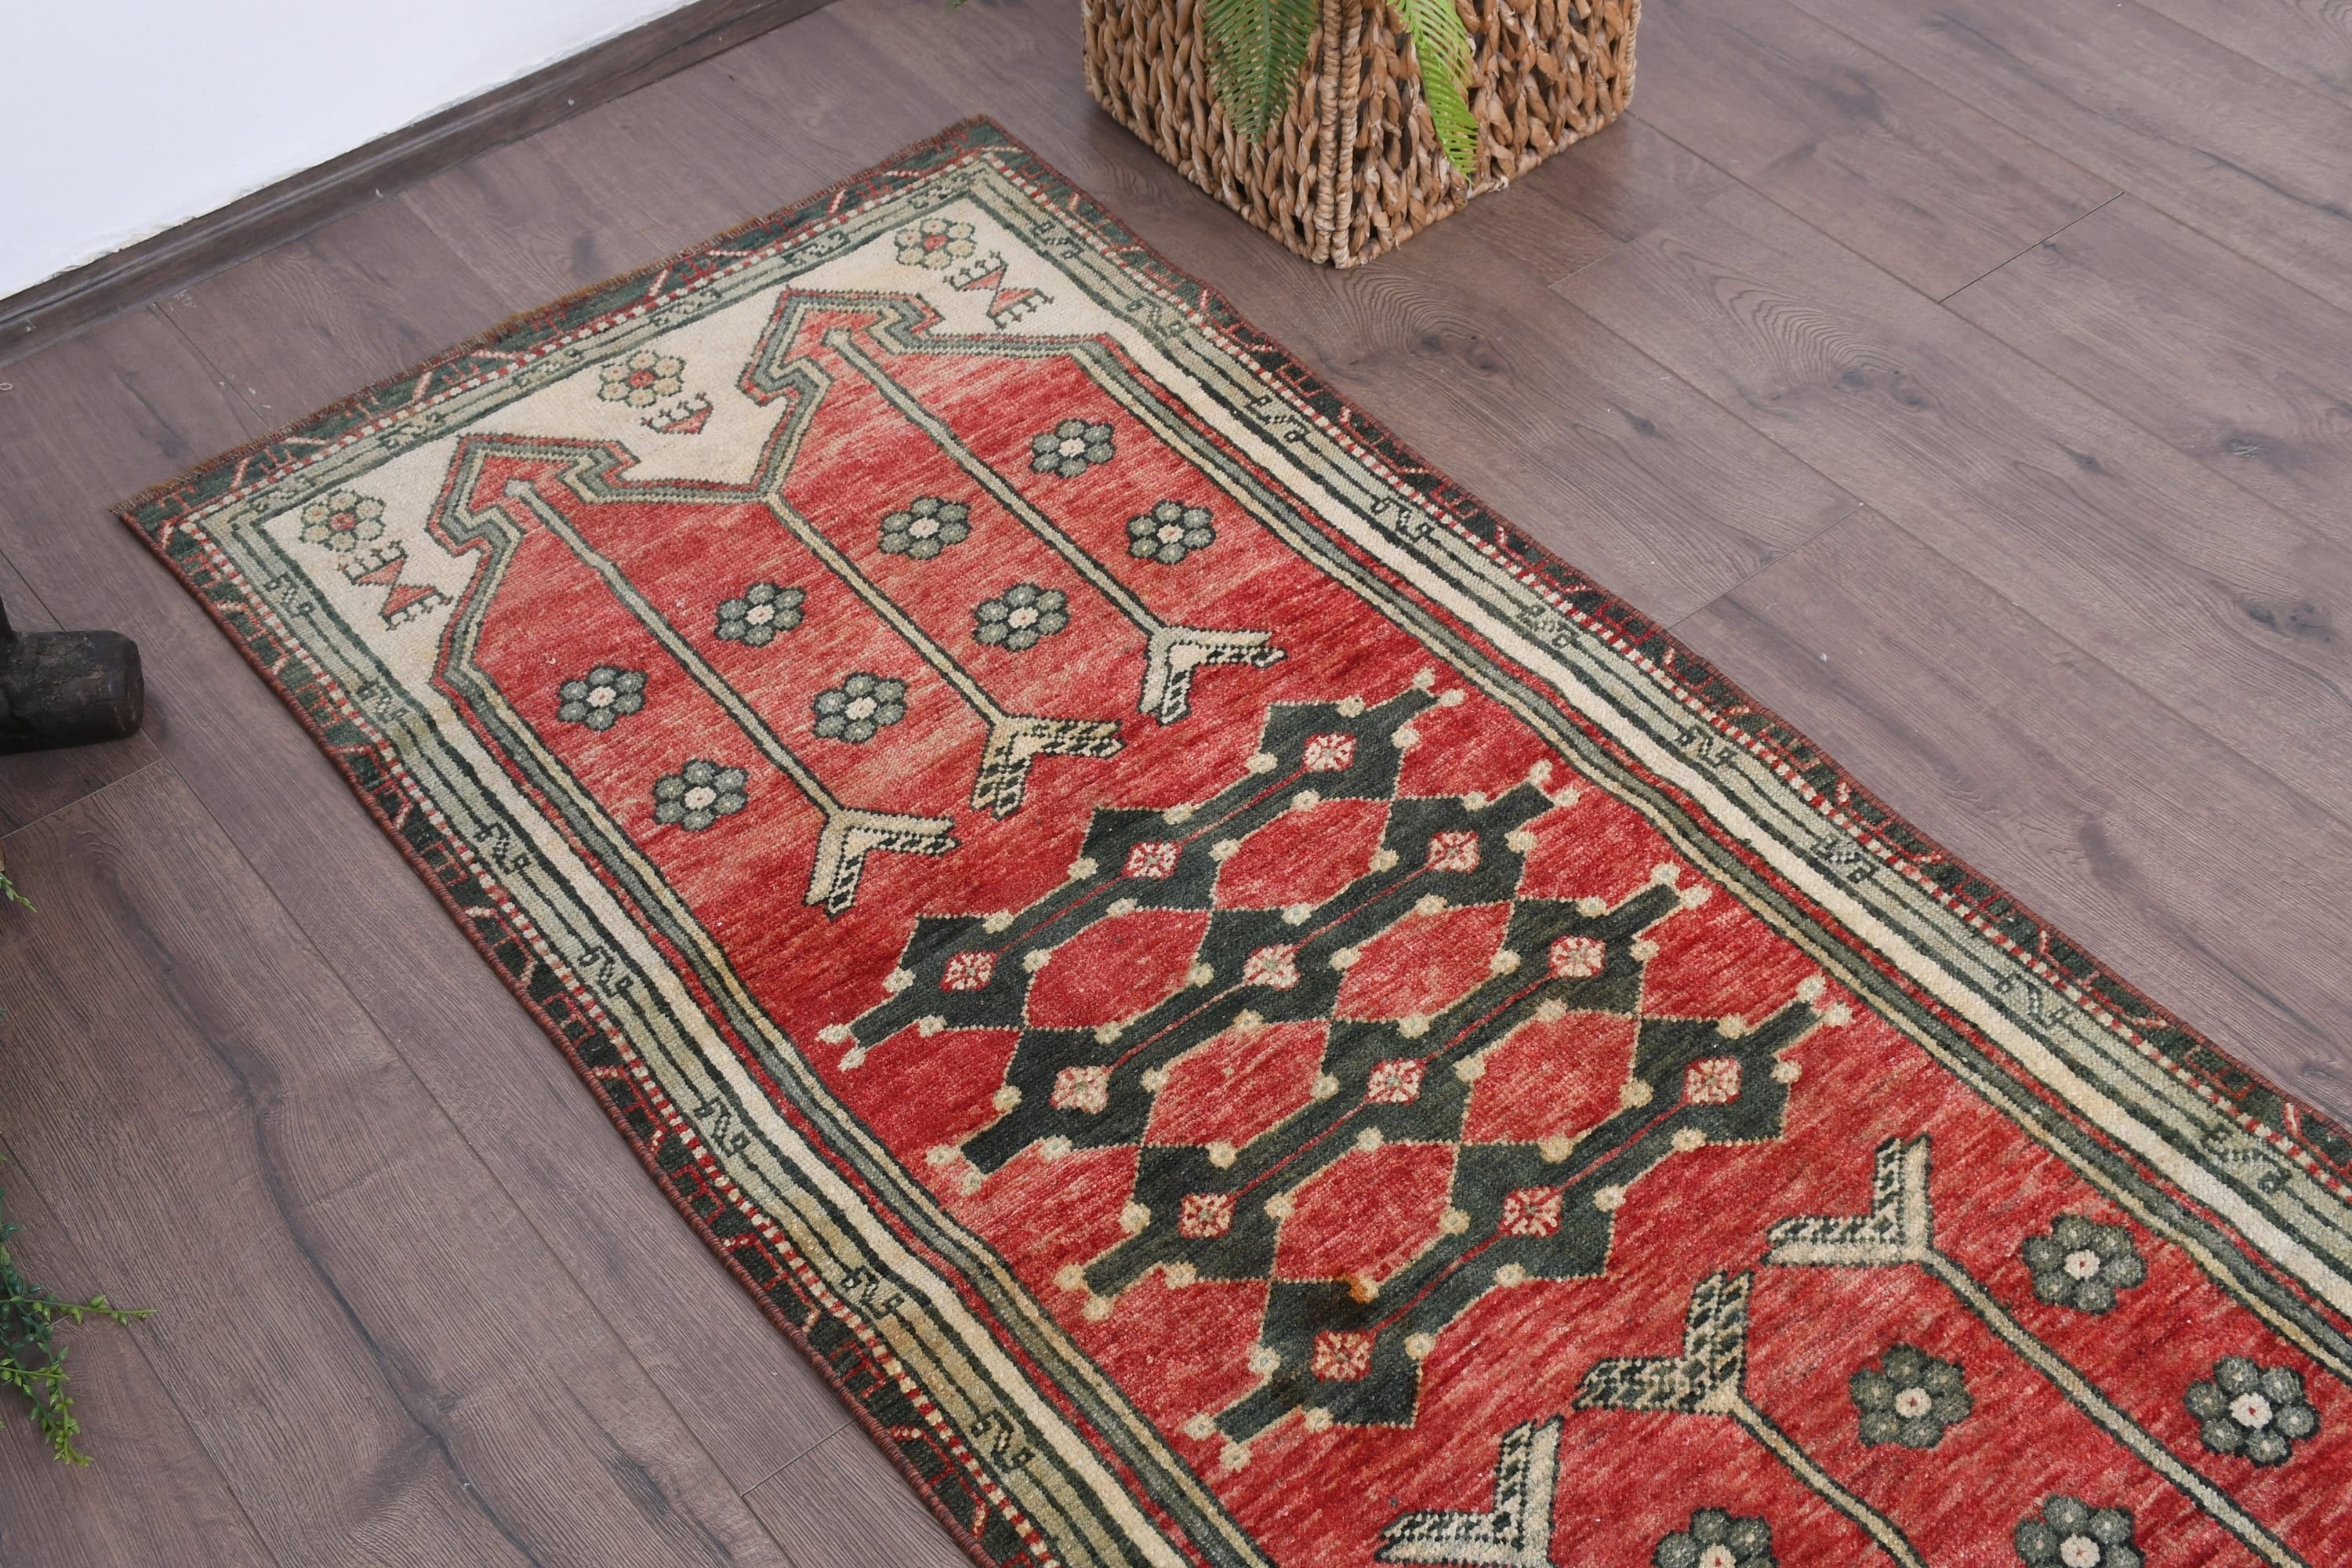 Red Antique Rug, Moroccan Rugs, Vintage Rug, Car Mat Rugs, 2.3x5.3 ft Small Rug, Turkish Rug, Entryway Rug Rugs, Kitchen Rug